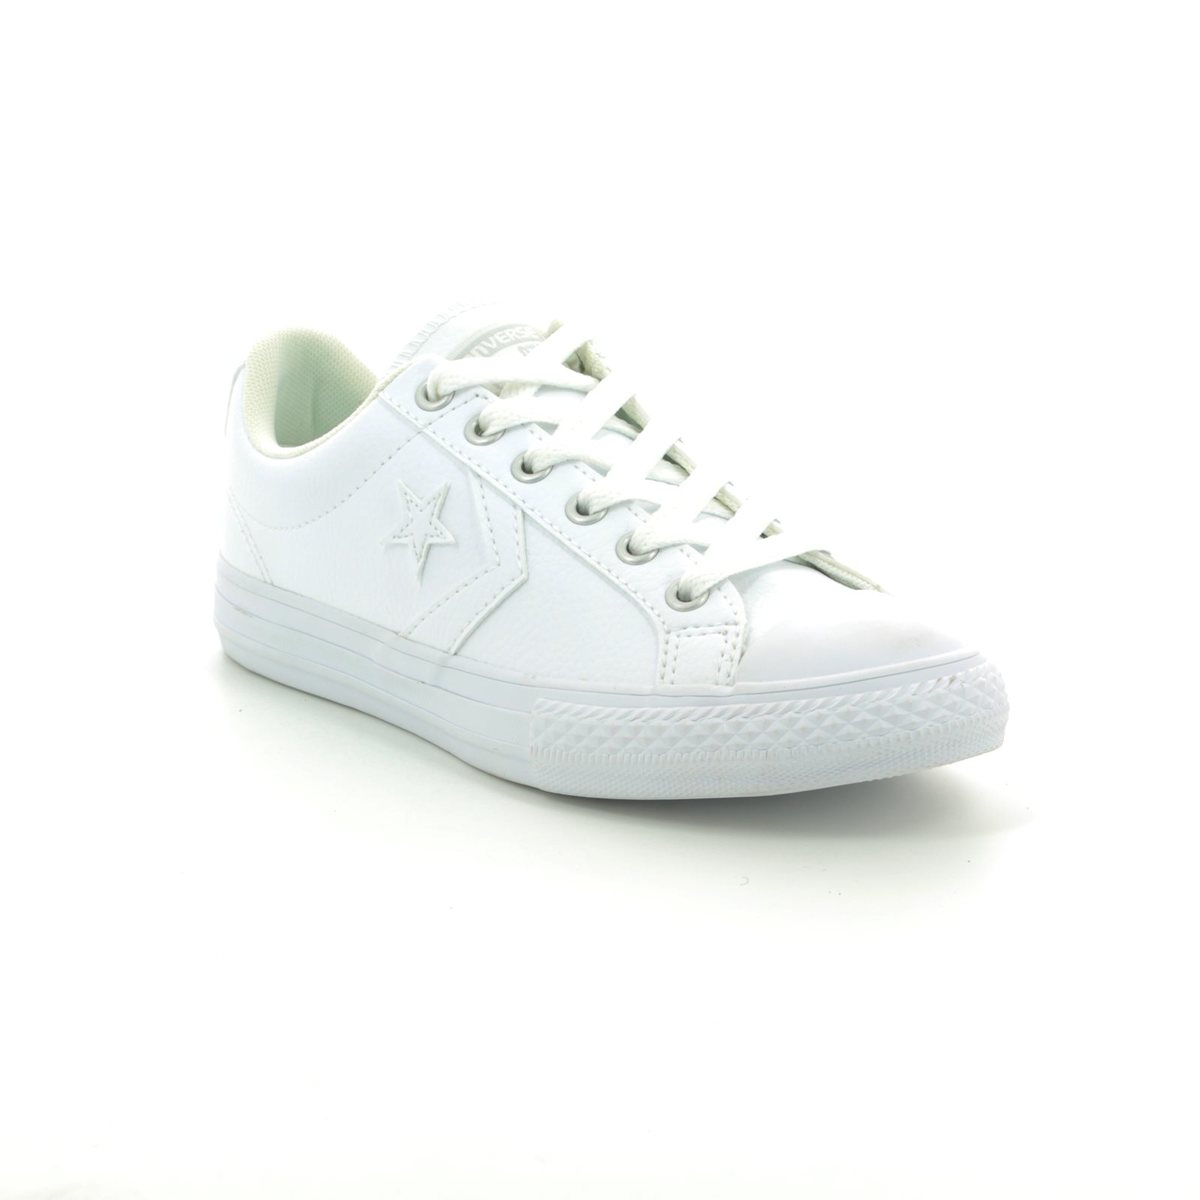 converse star player ox leather trainer